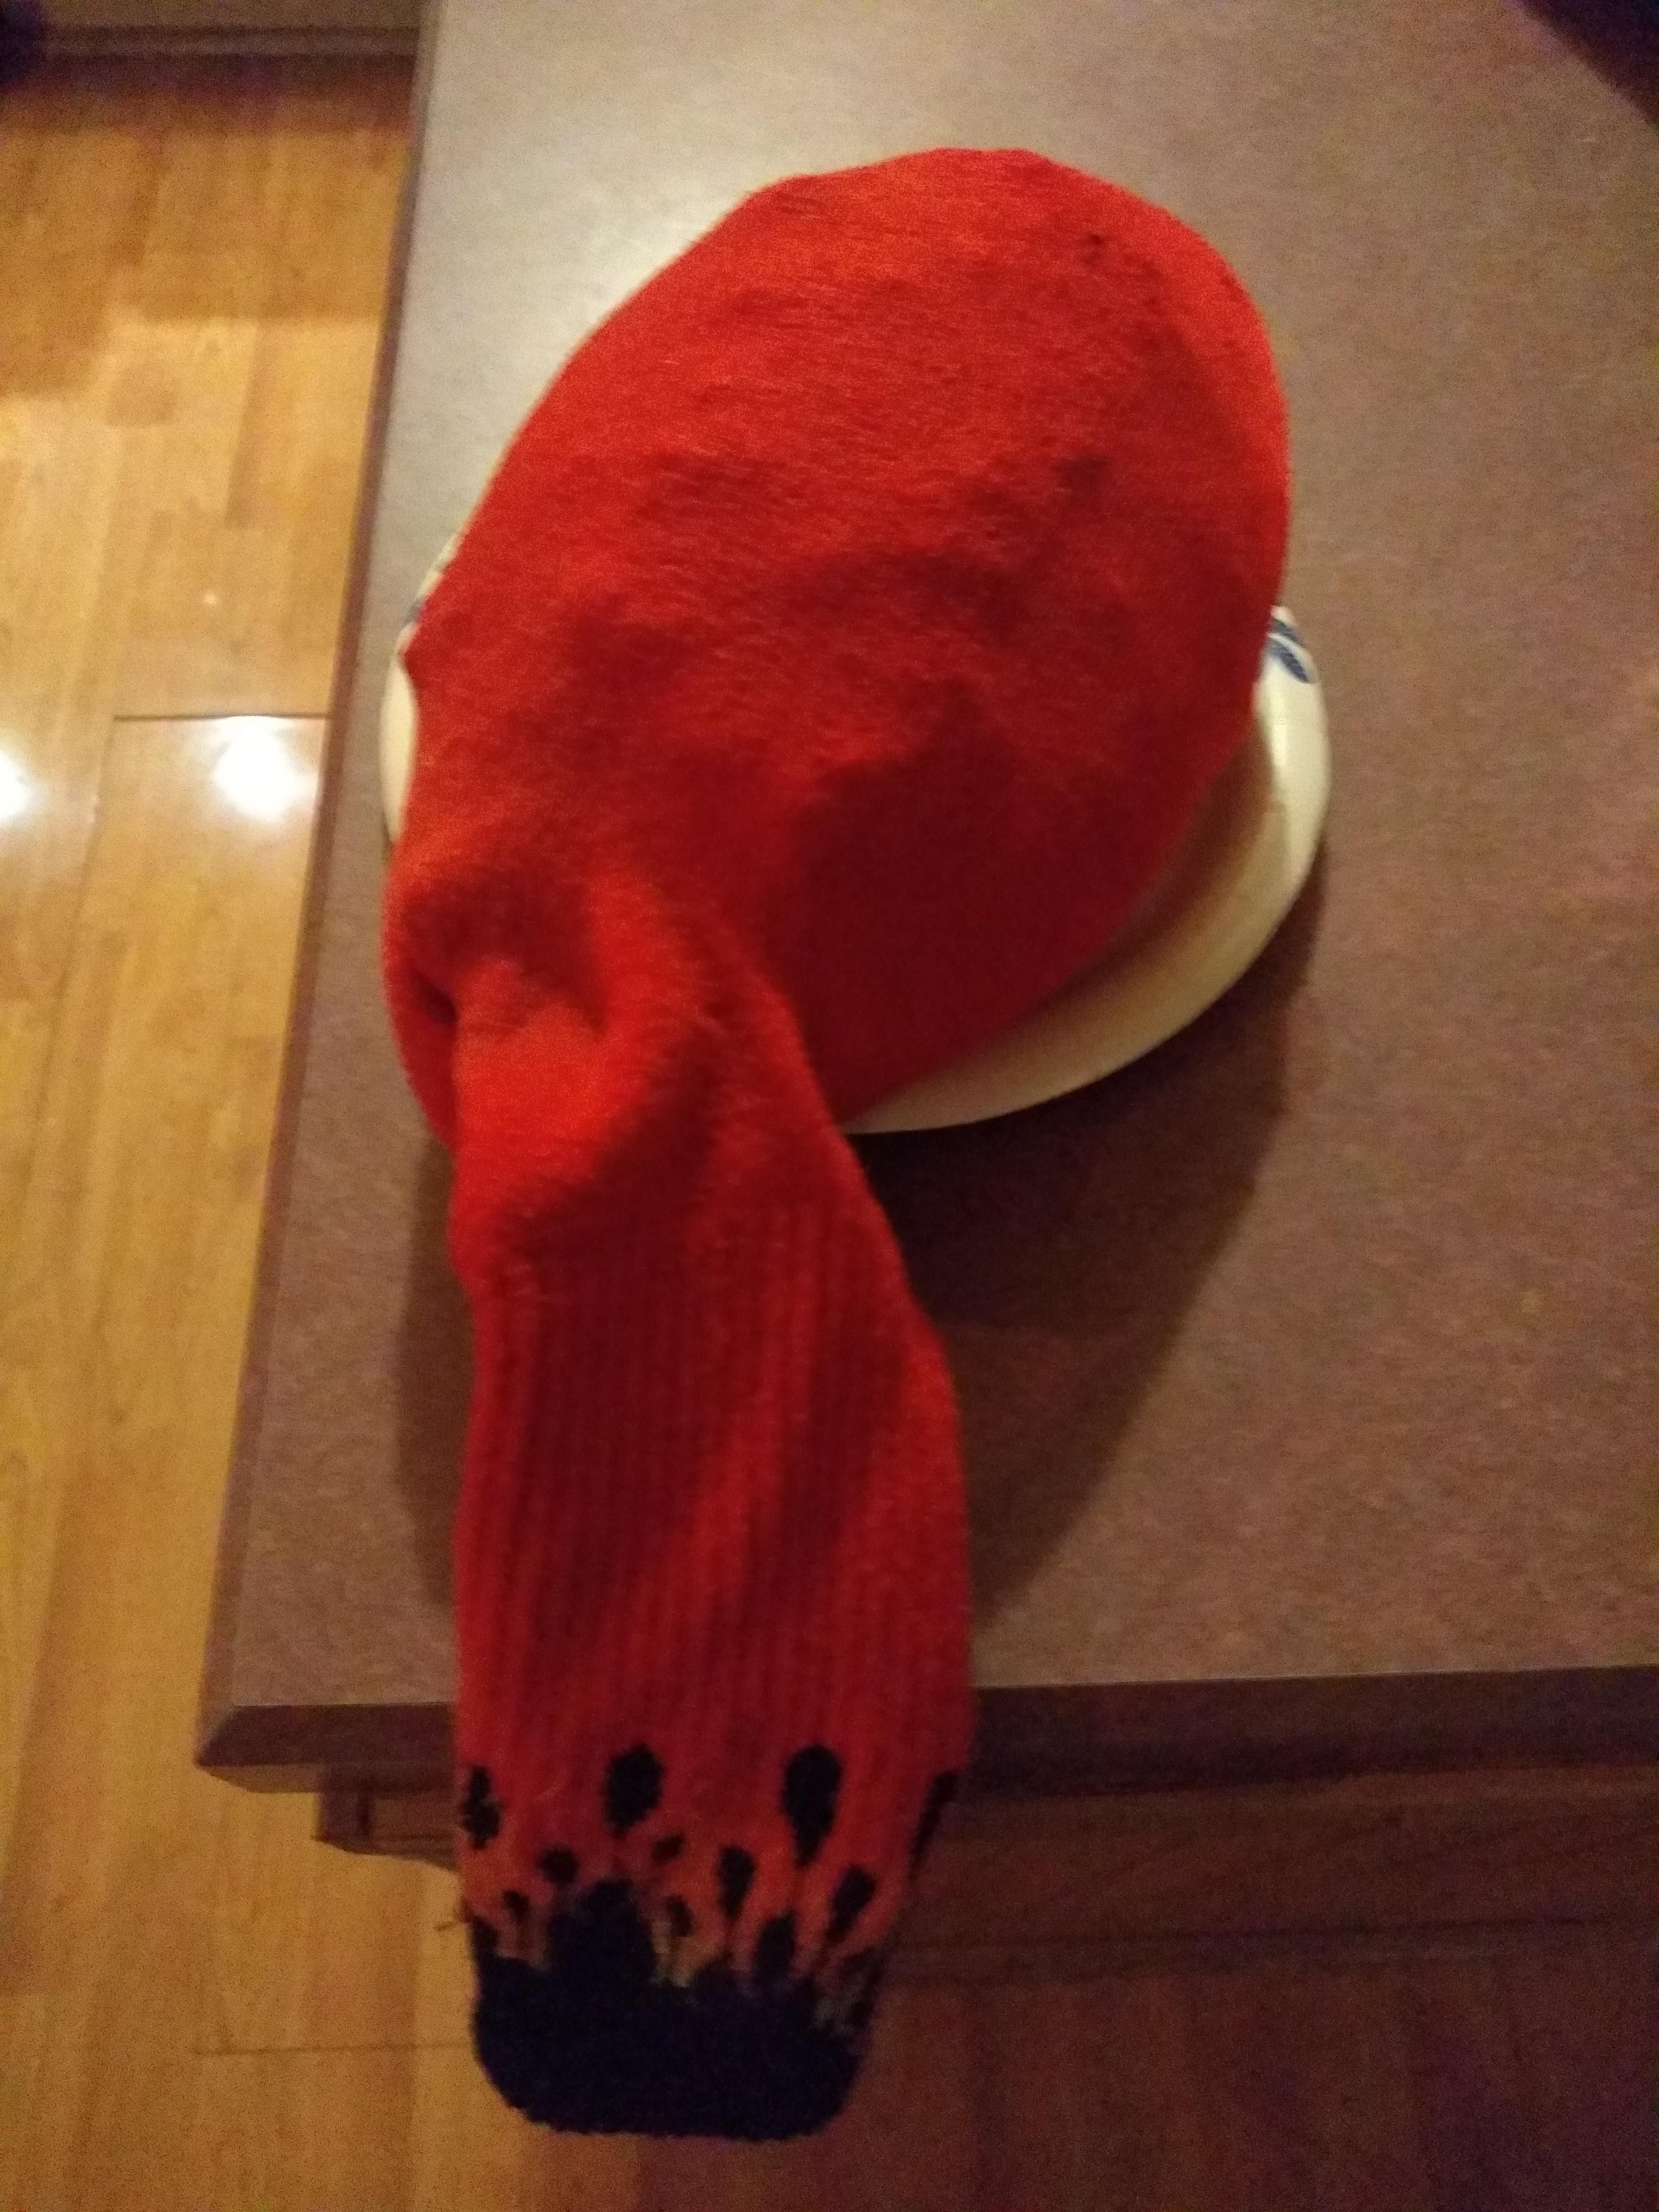 My wife wanted to microwave rice in a sock to use as a heating pad. Turns out, we had no rice, but we had popcorn kernels. I really don't know why she was expecting a different result.